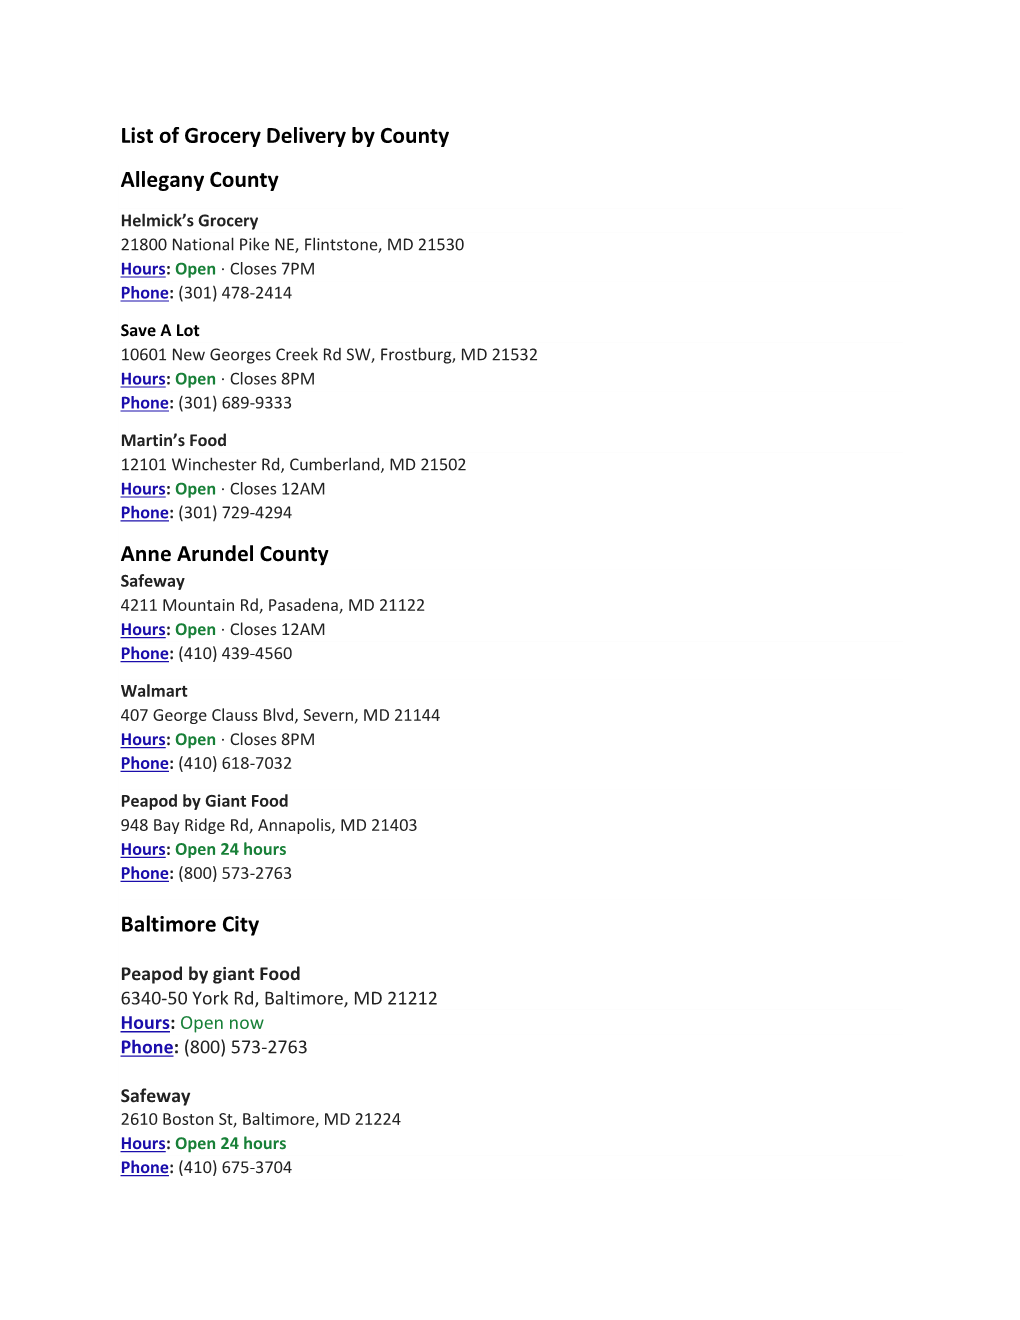 List of Grocery Delivery by County.Pdf